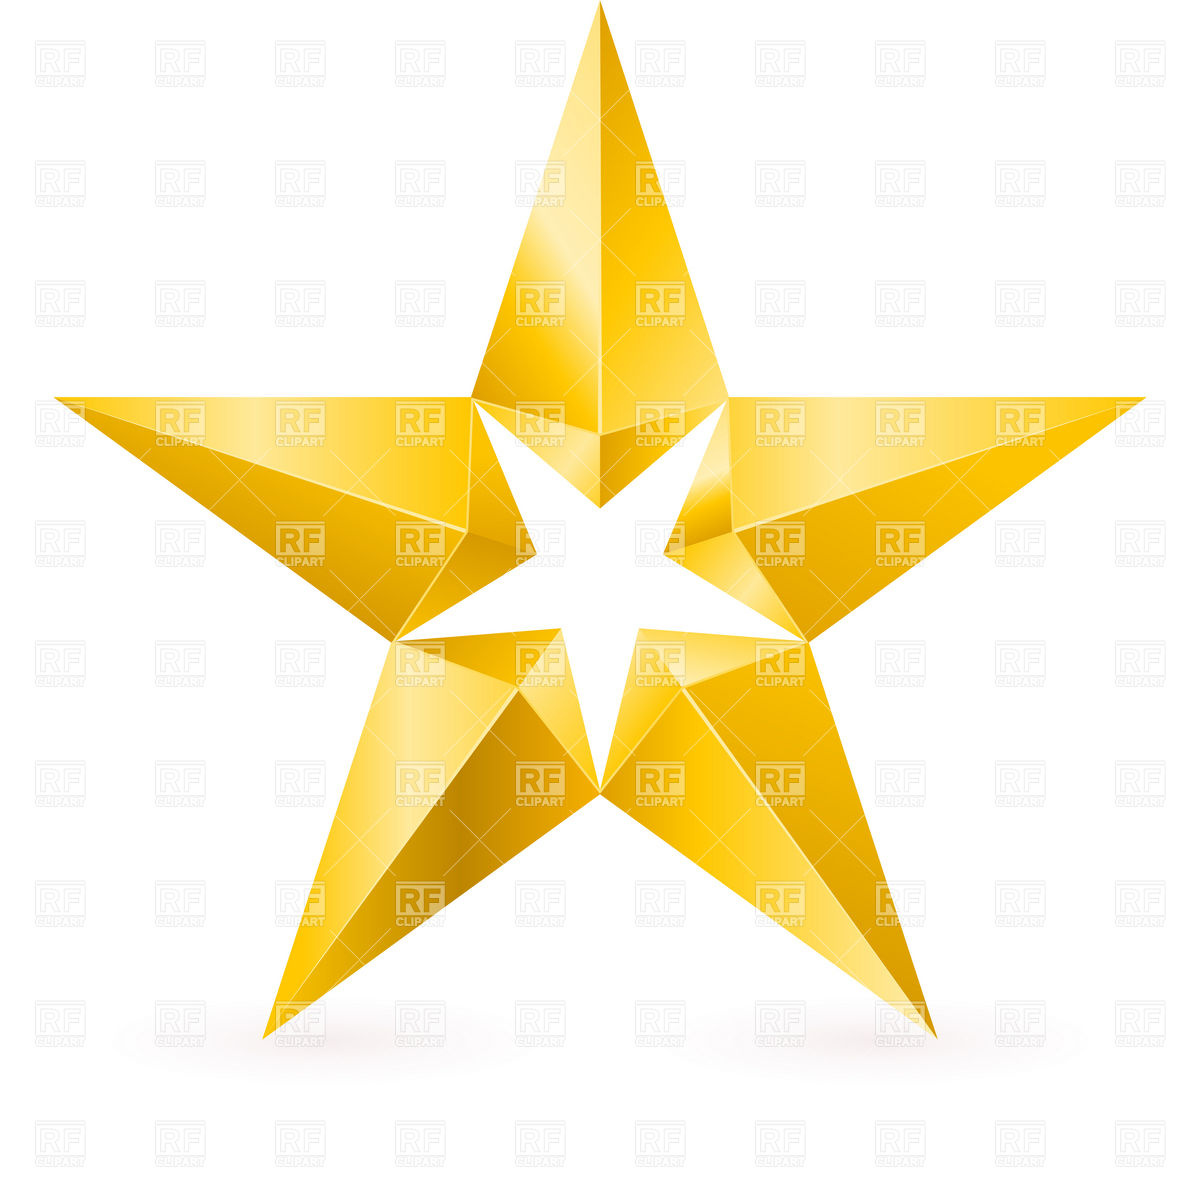 Star With Facets 9369 Objects Download Royalty Free Vector Clipart